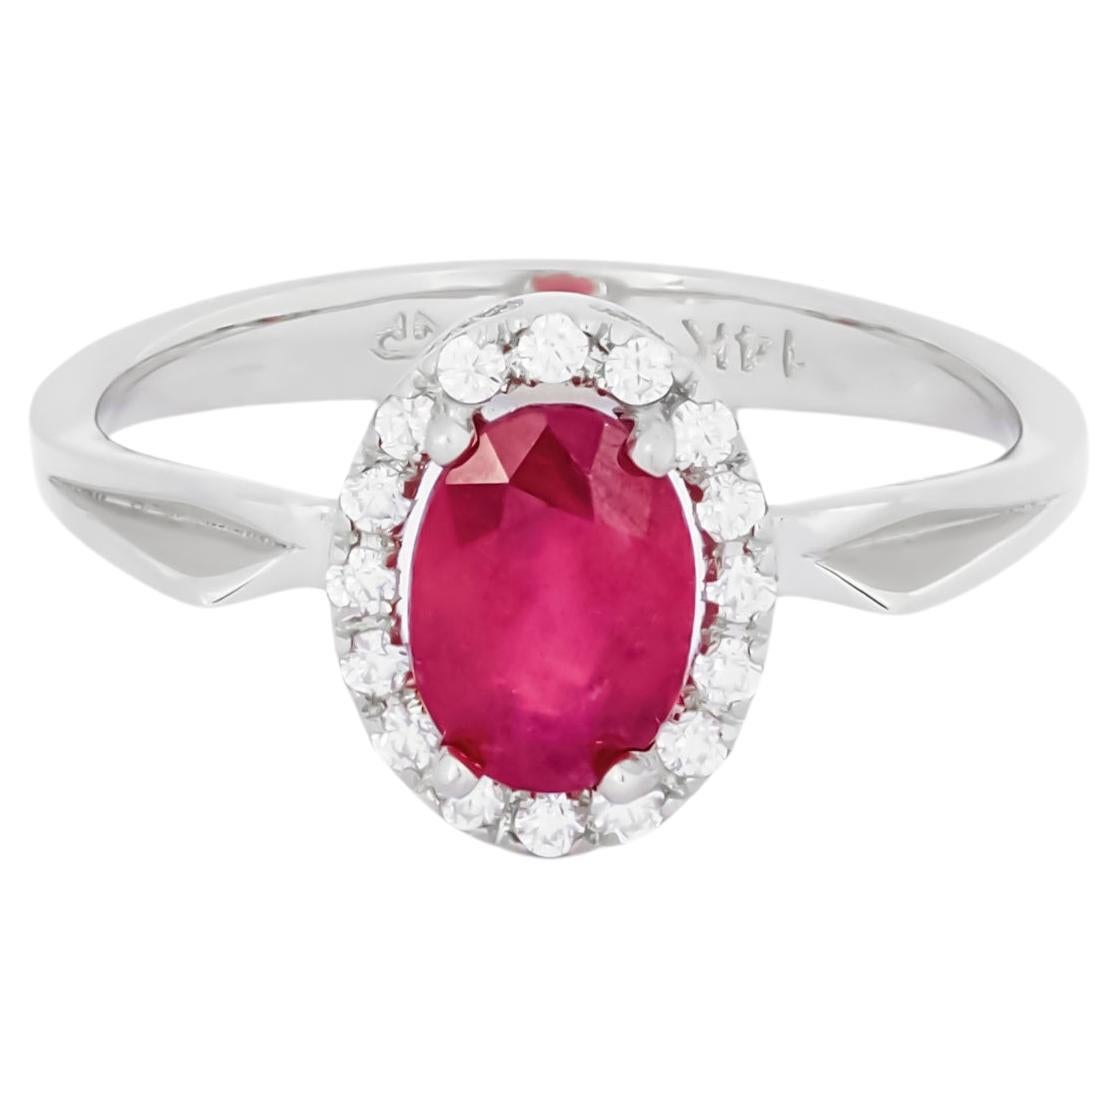 For Sale:  Oval  Ruby Engagement Ring in 14k gold